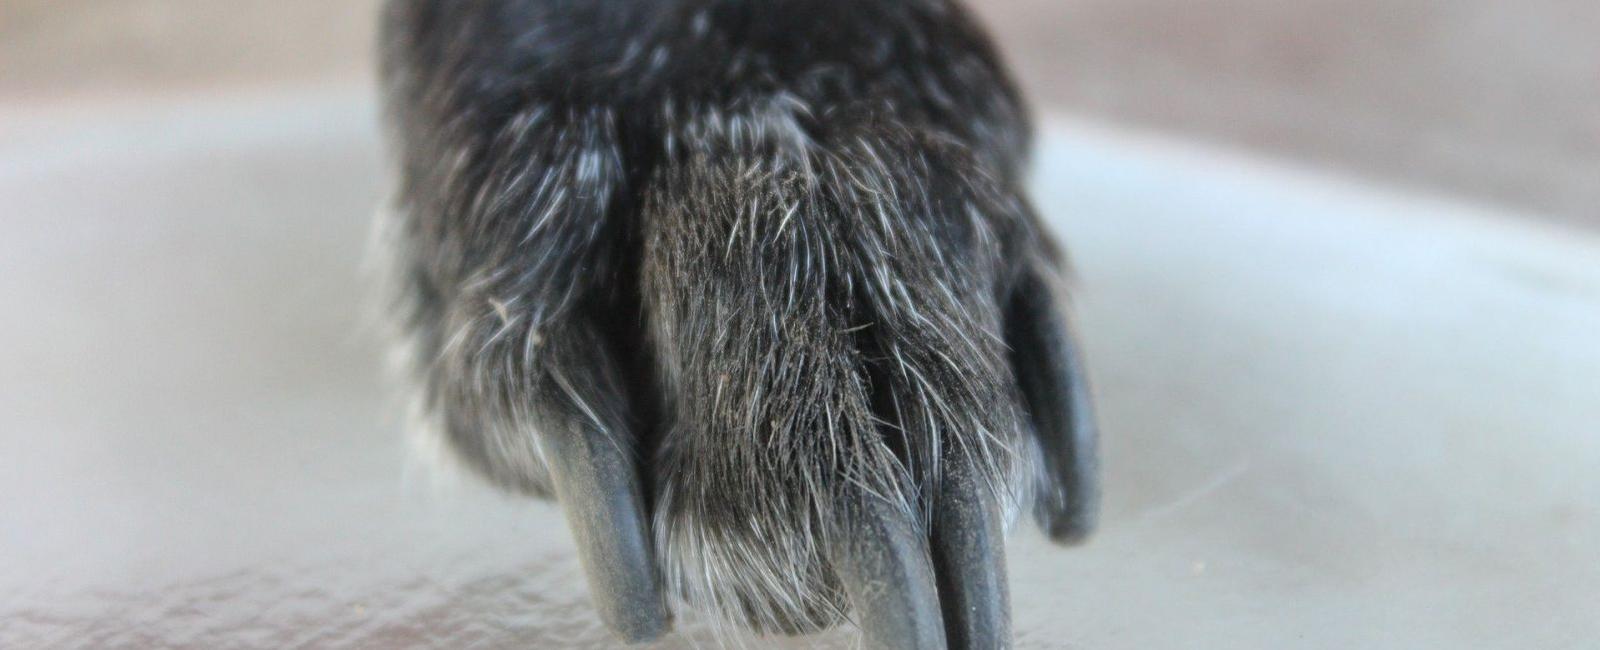 Your Dog Won’t Let You Trim His Nails? Try These Methods